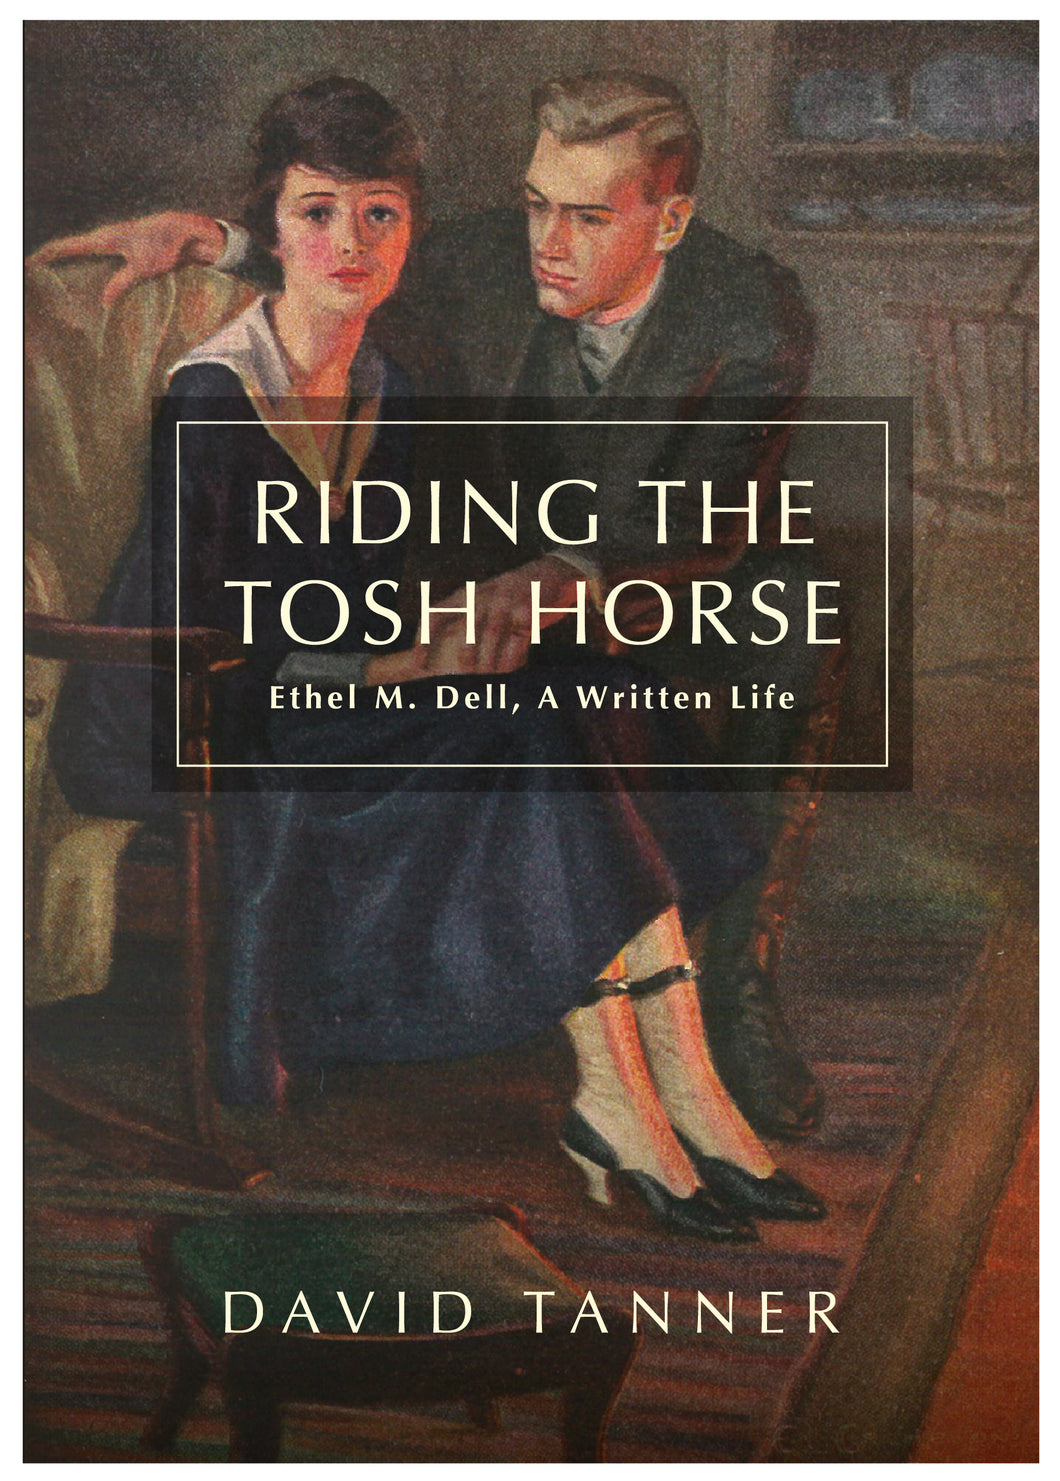 Riding The Tosh Horse - David Tanner